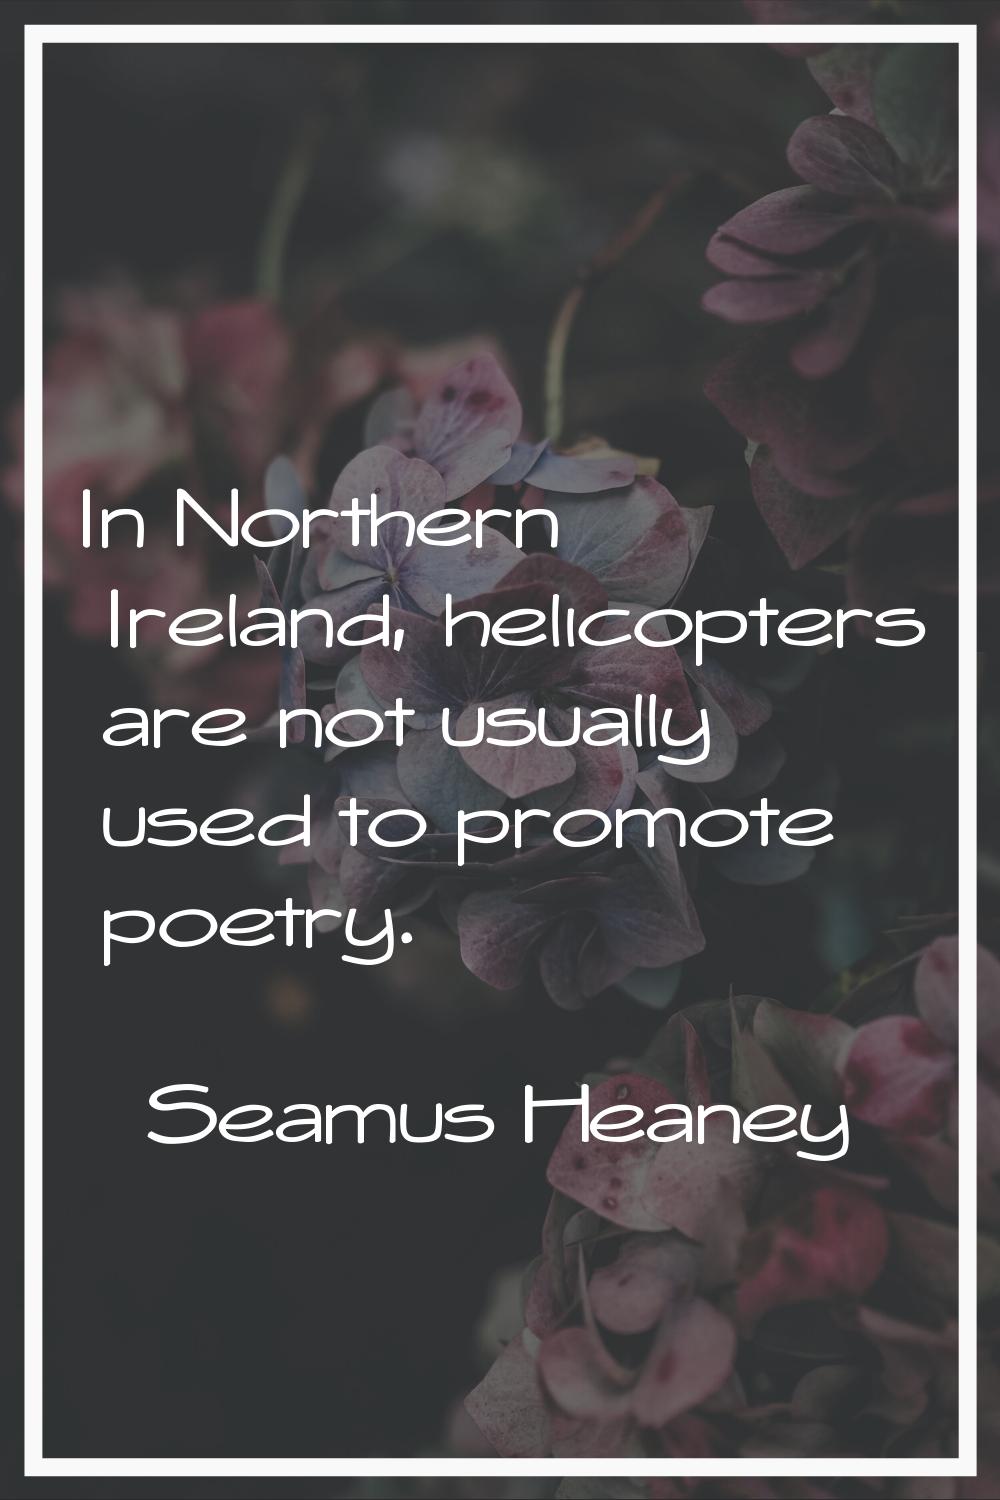 In Northern Ireland, helicopters are not usually used to promote poetry.